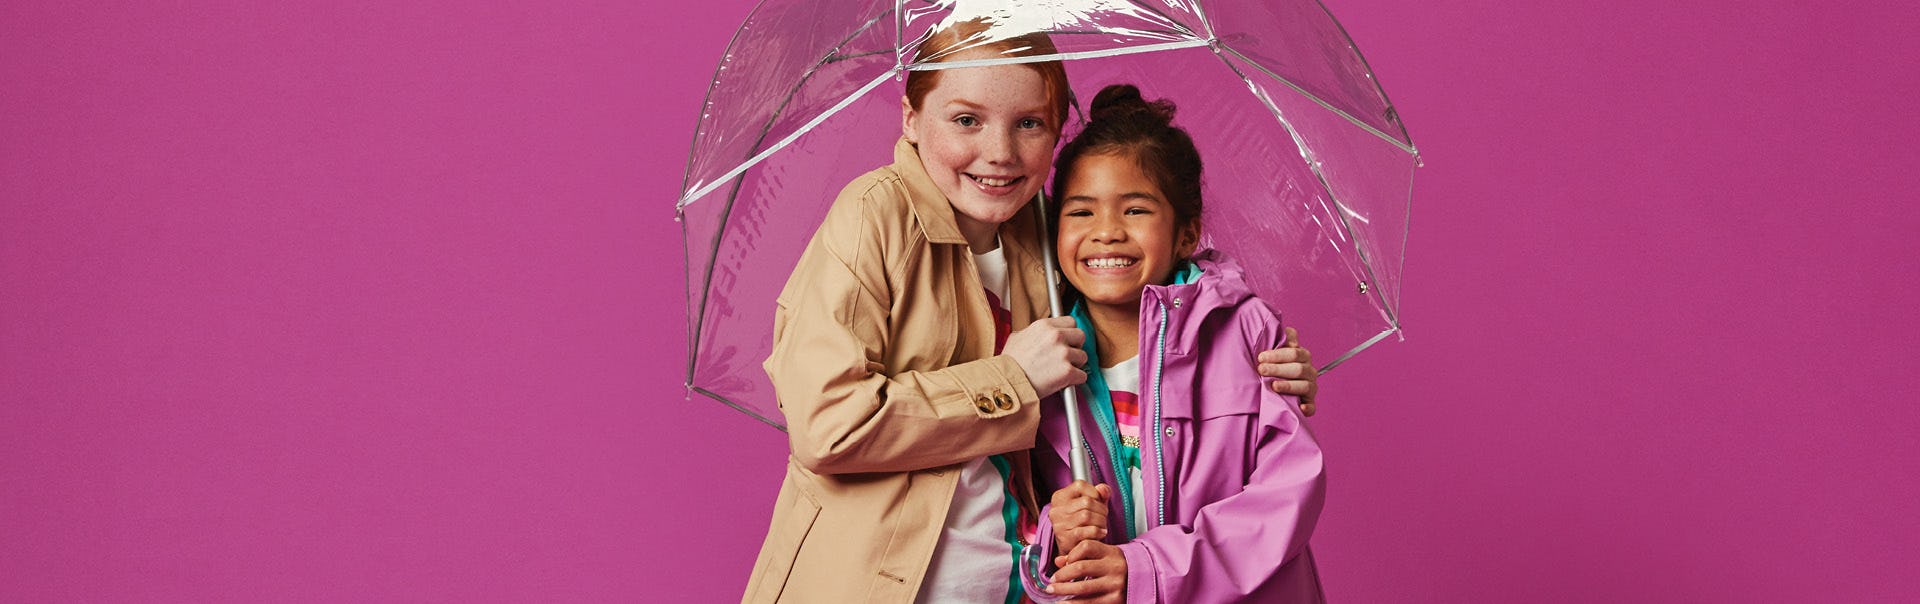 Two girls with umbrella